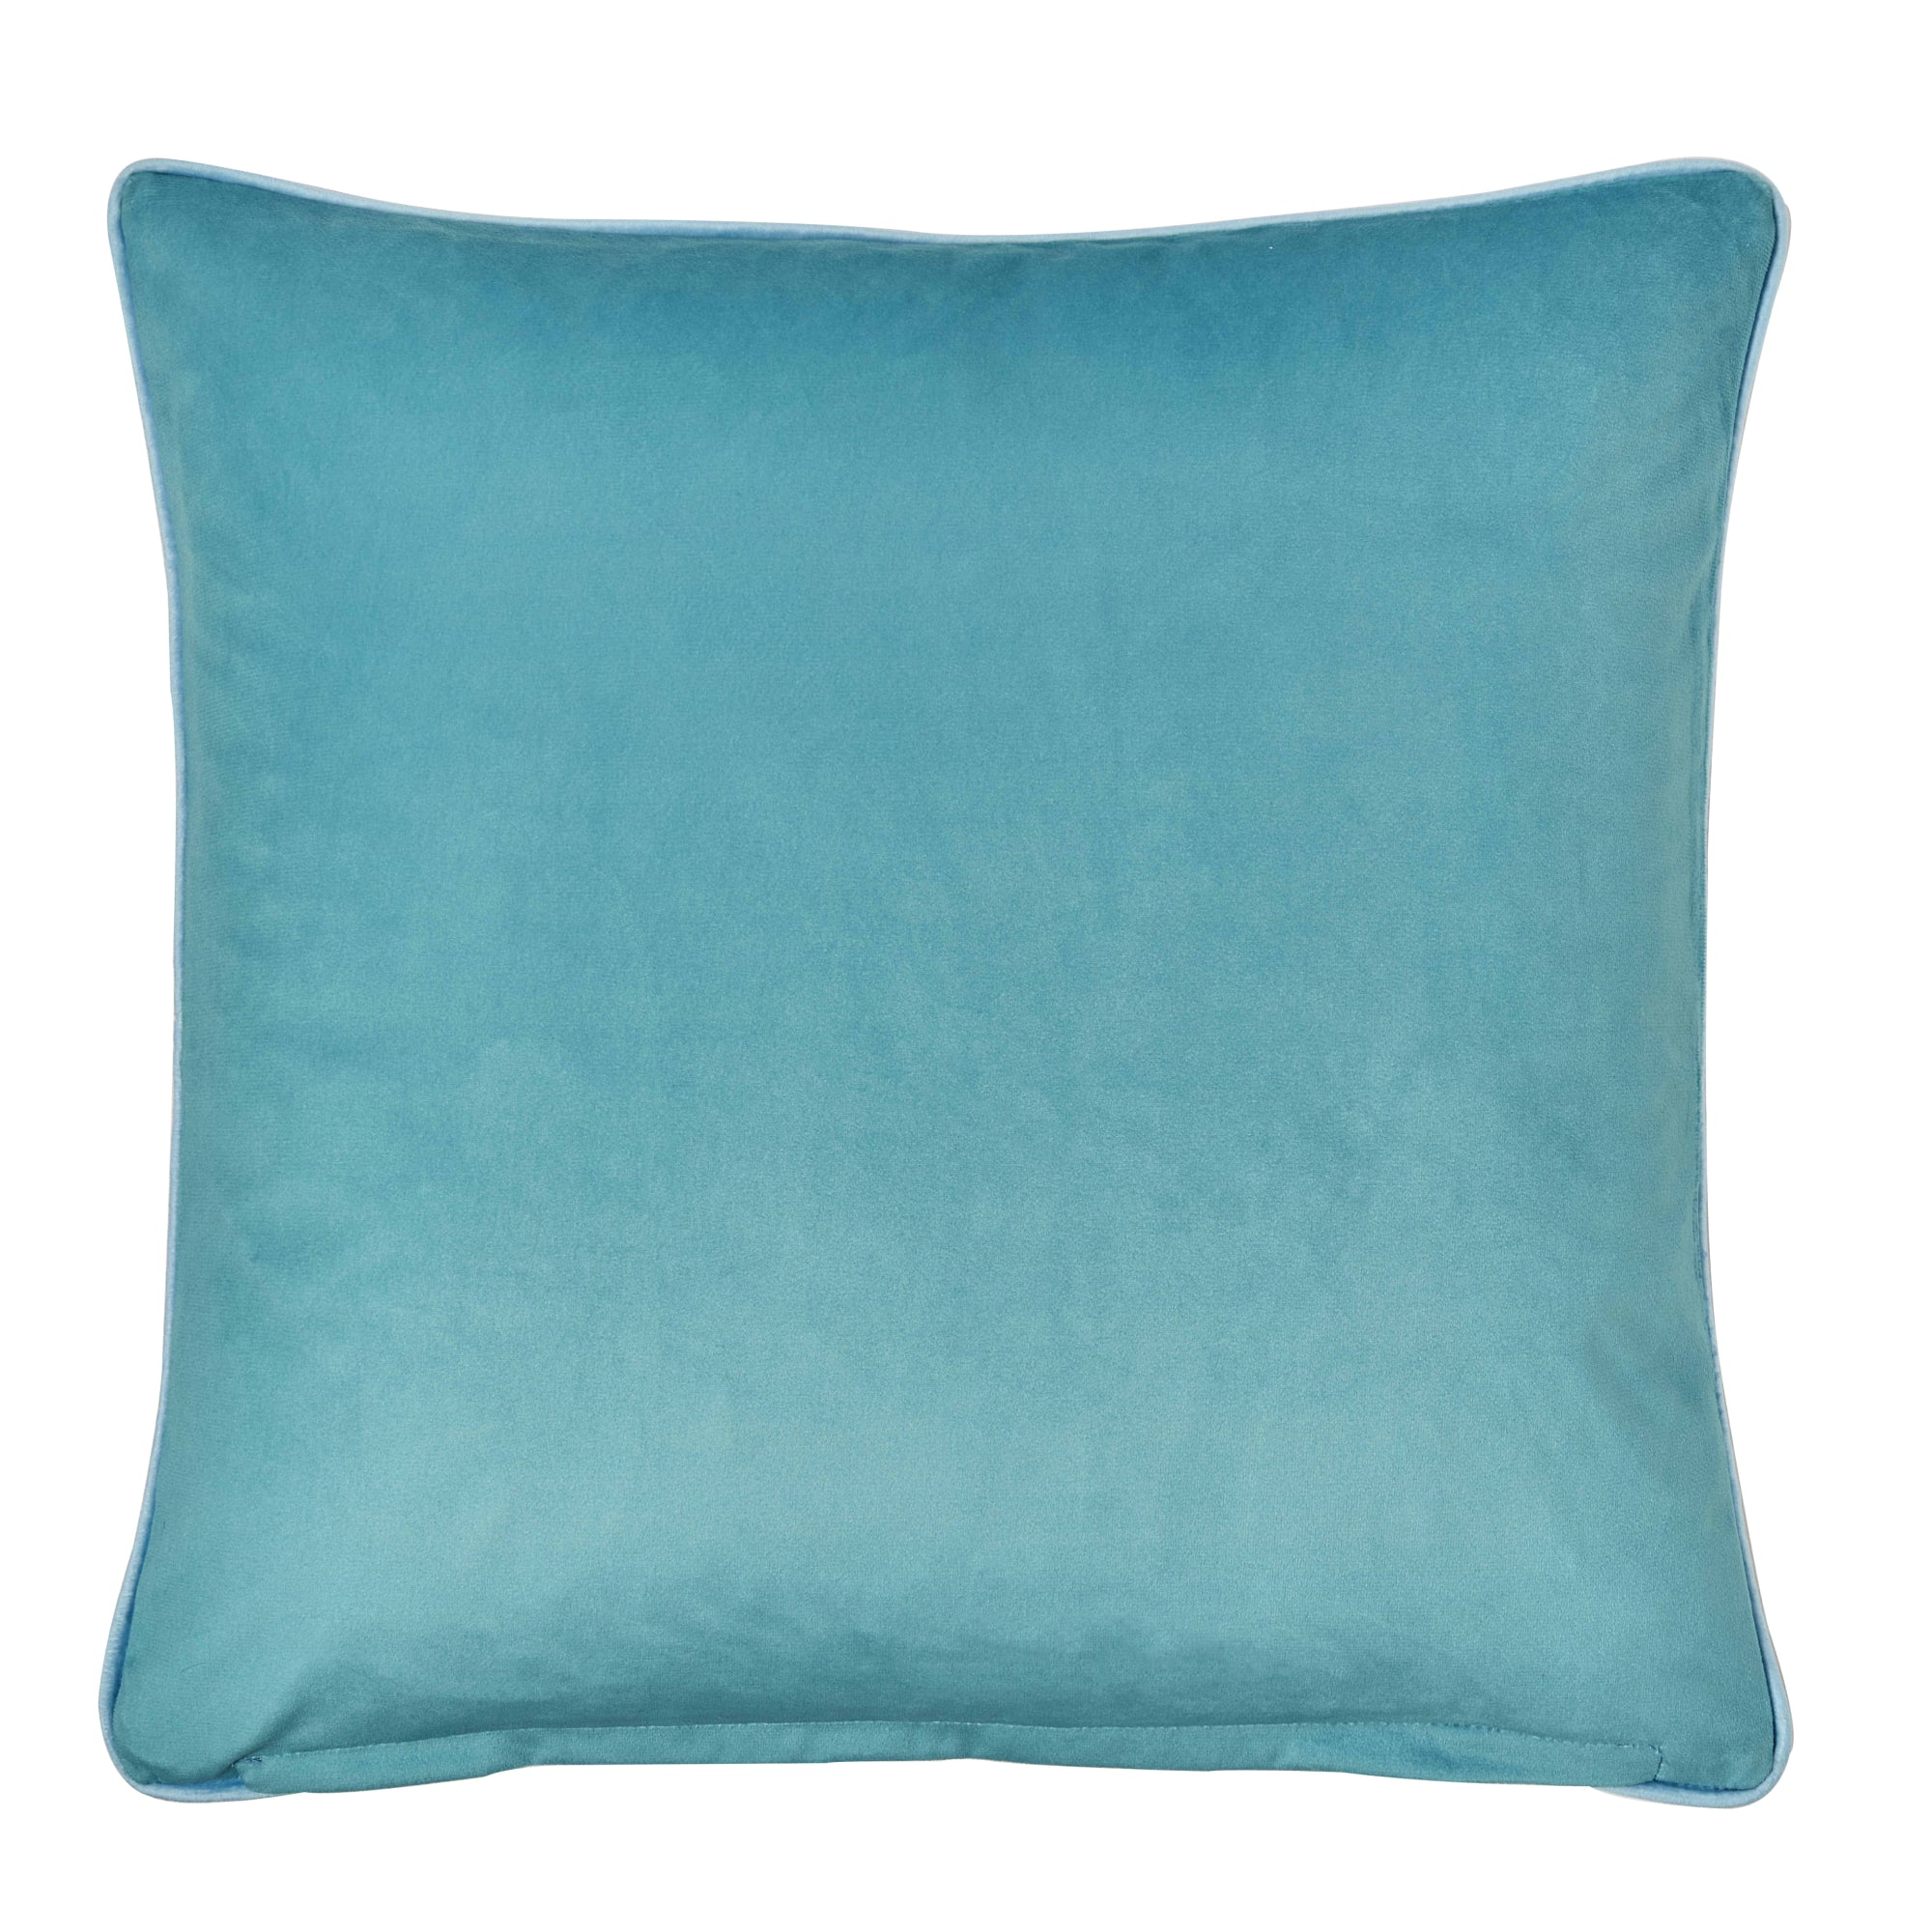 Filled Cushion Ingo by Fusion in Green